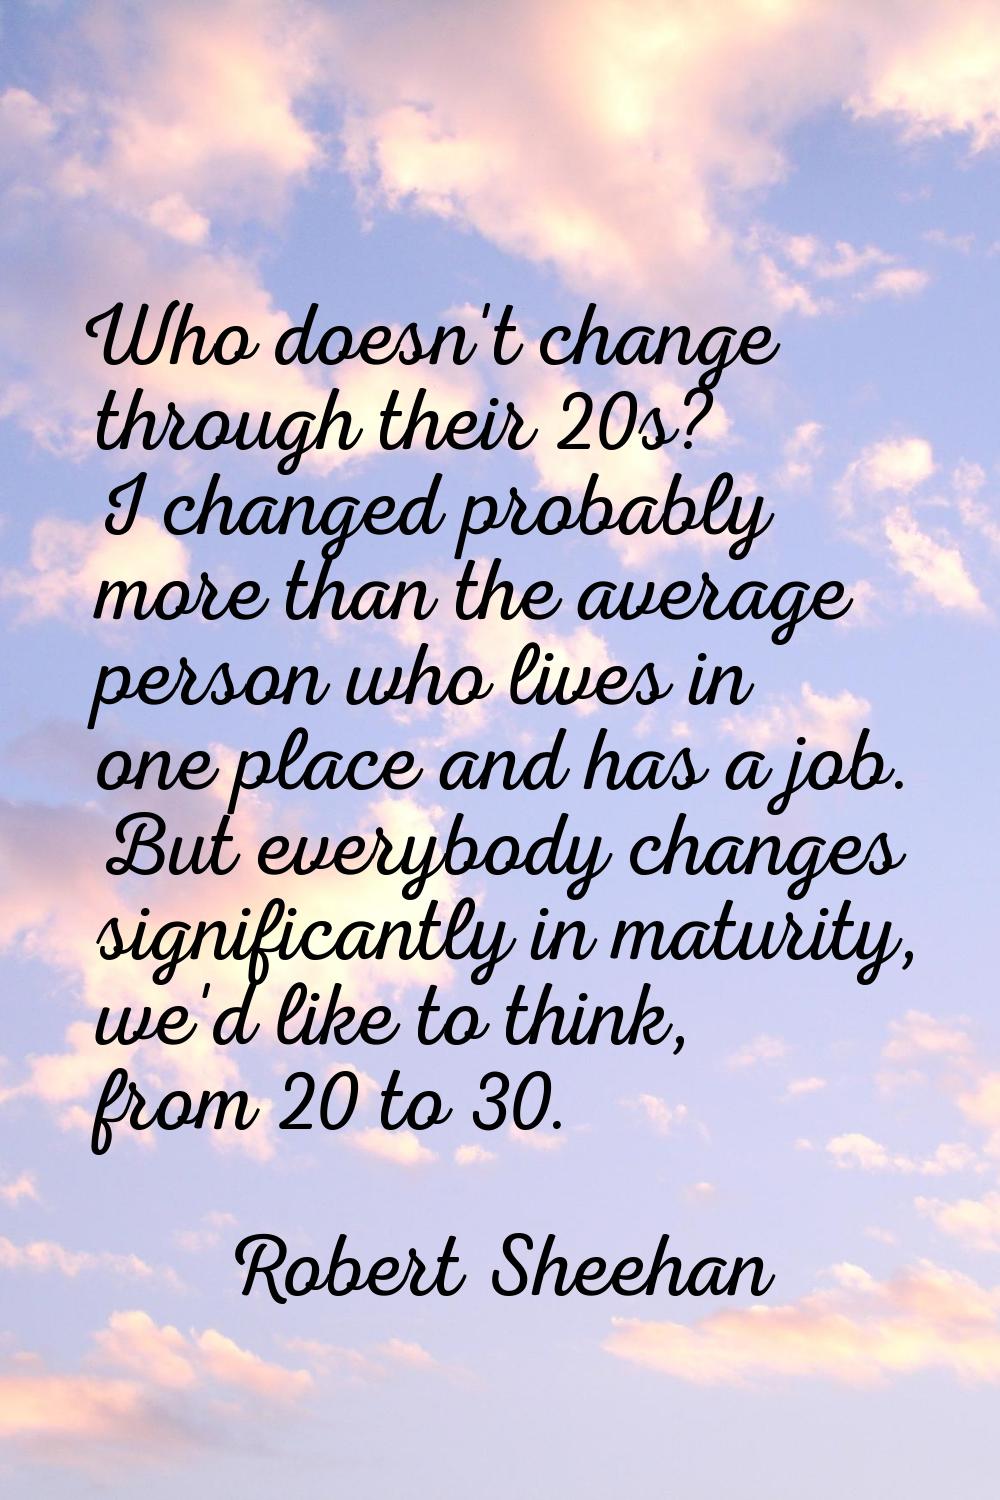 Who doesn't change through their 20s? I changed probably more than the average person who lives in 